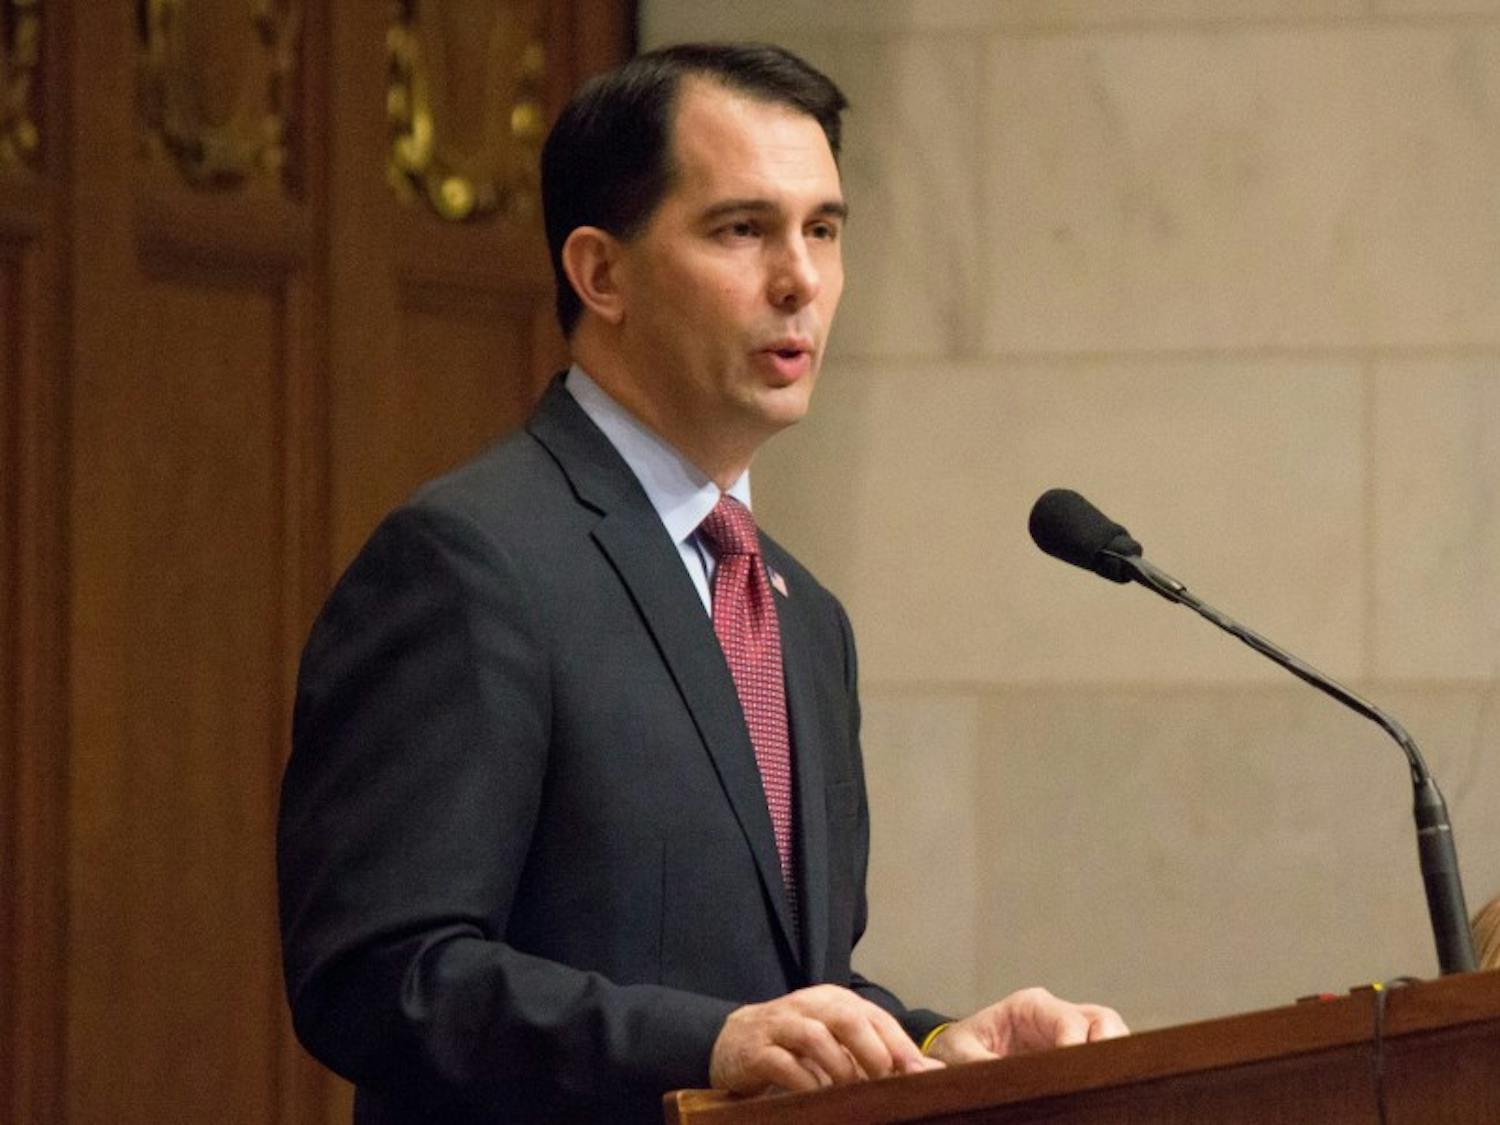 Gov. Scott Walker sent a letter to the NFL Monday urging players to “stop their protests during the anthem and move on from what has become a divisive political sideshow.”